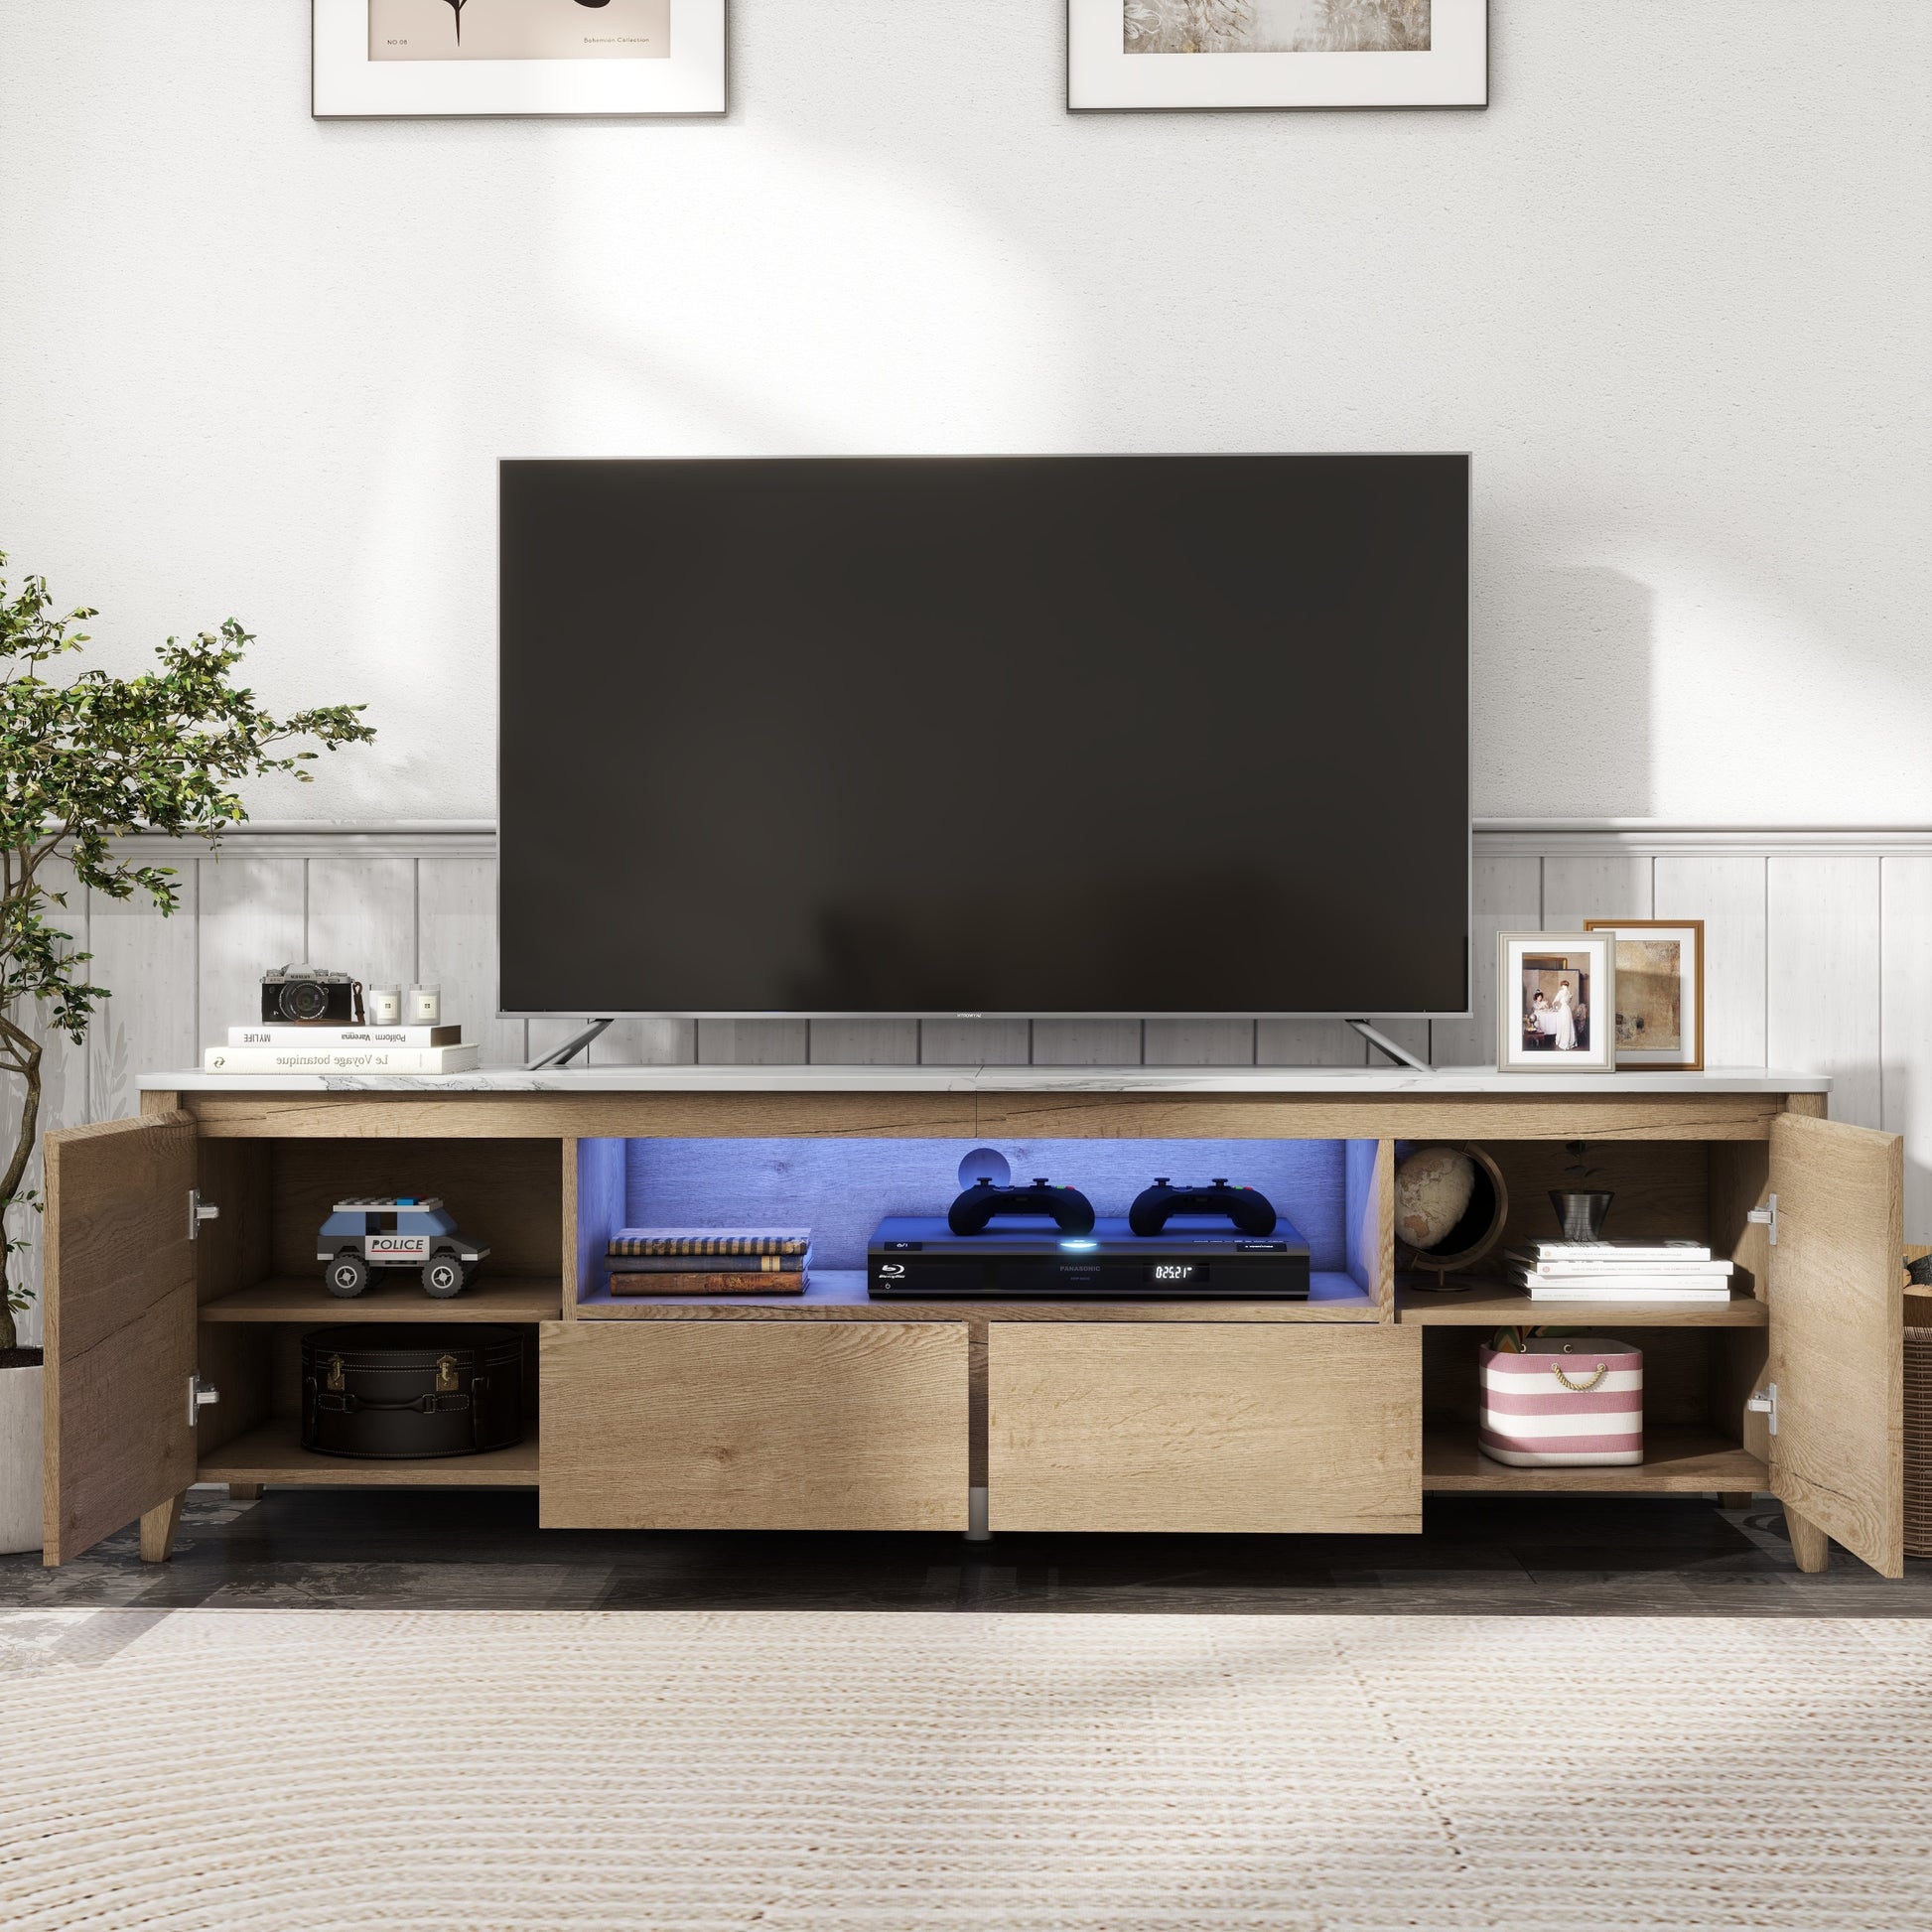 70 Inches Modern TV stand with LED Lights natural wood wash-particle board